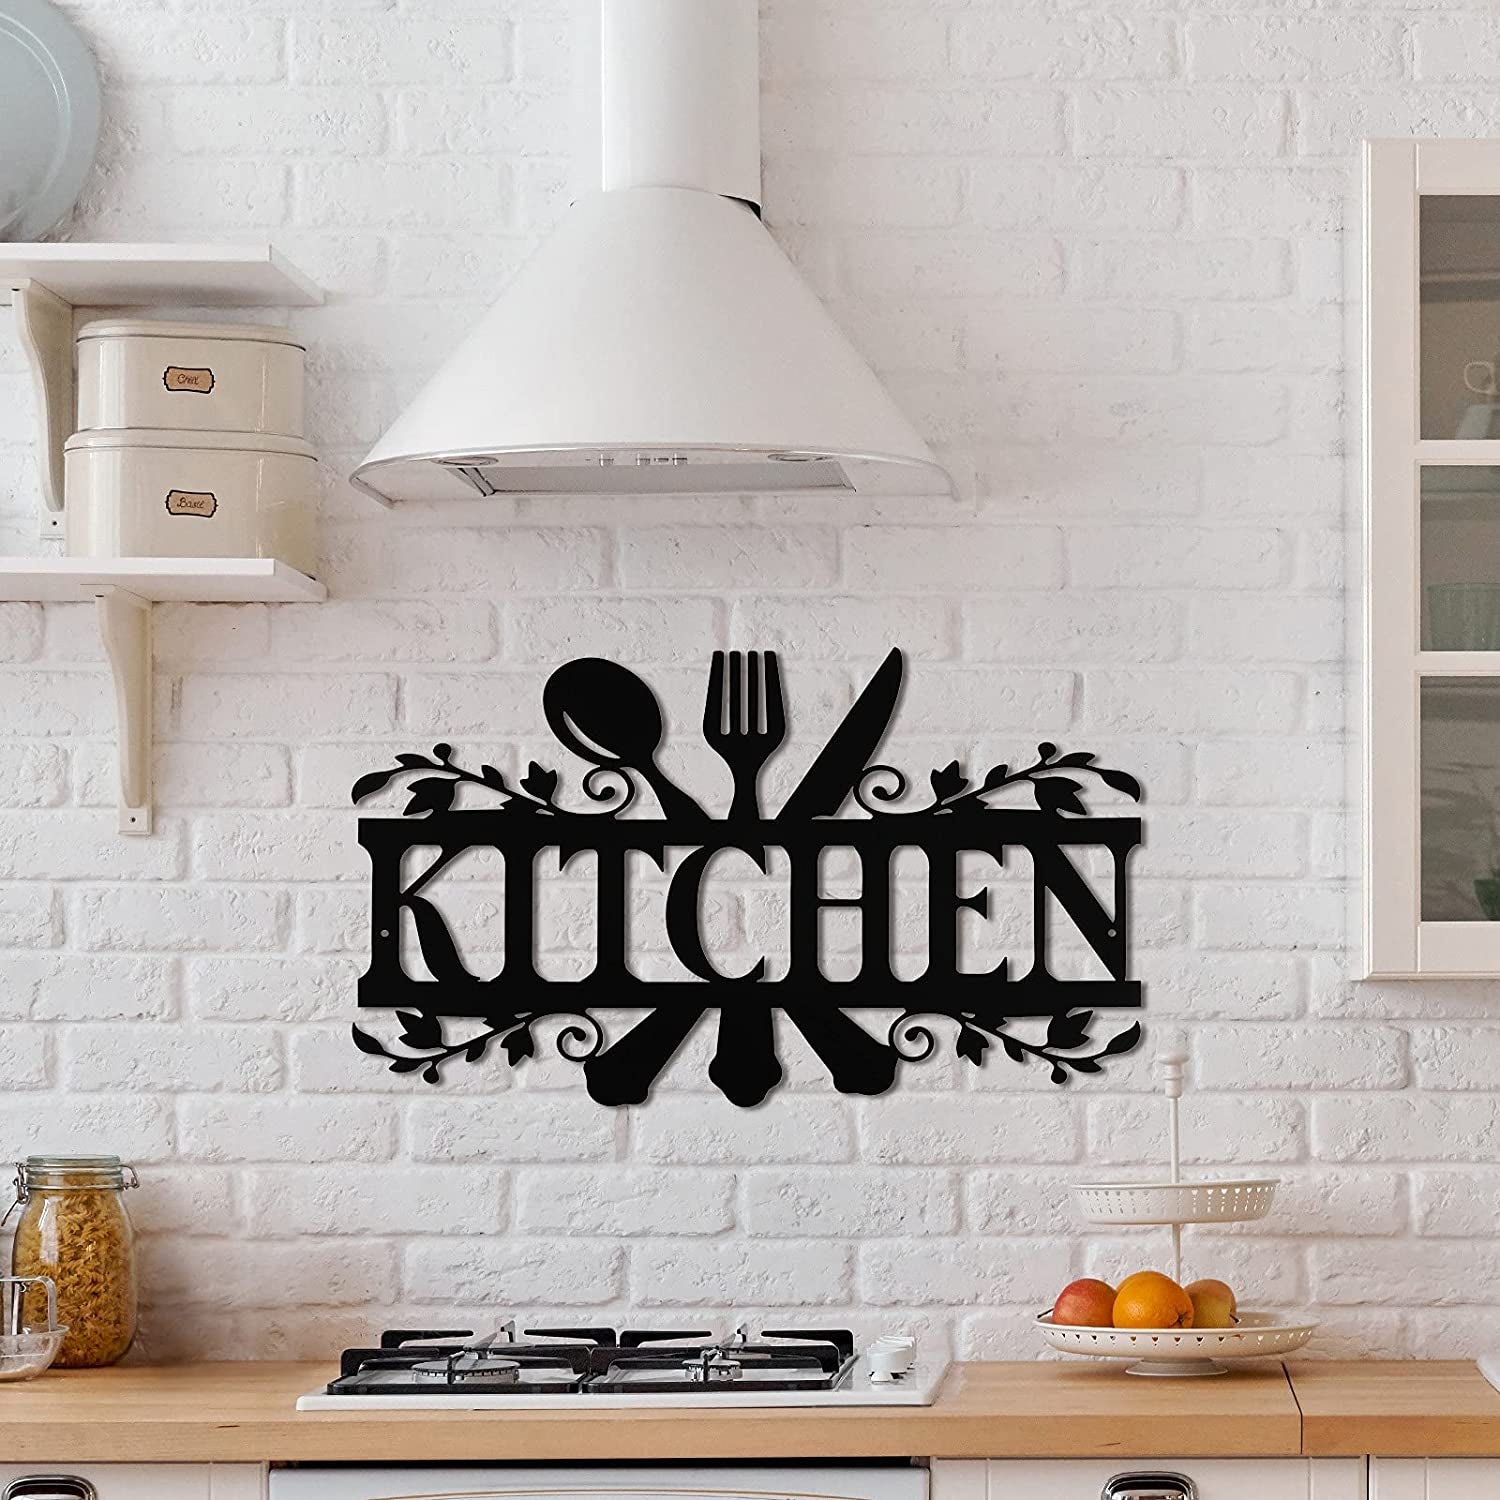 Kitchen Metal Sign, Kitchen Signs Wall Decor Rustic Metal Kitchen Decor Sign, Country Farmhouse Decoration for Mardi Gras Easter Your Home, Kitchen, or Dining Room, 14 X 8.8 Inches (Classic Style)